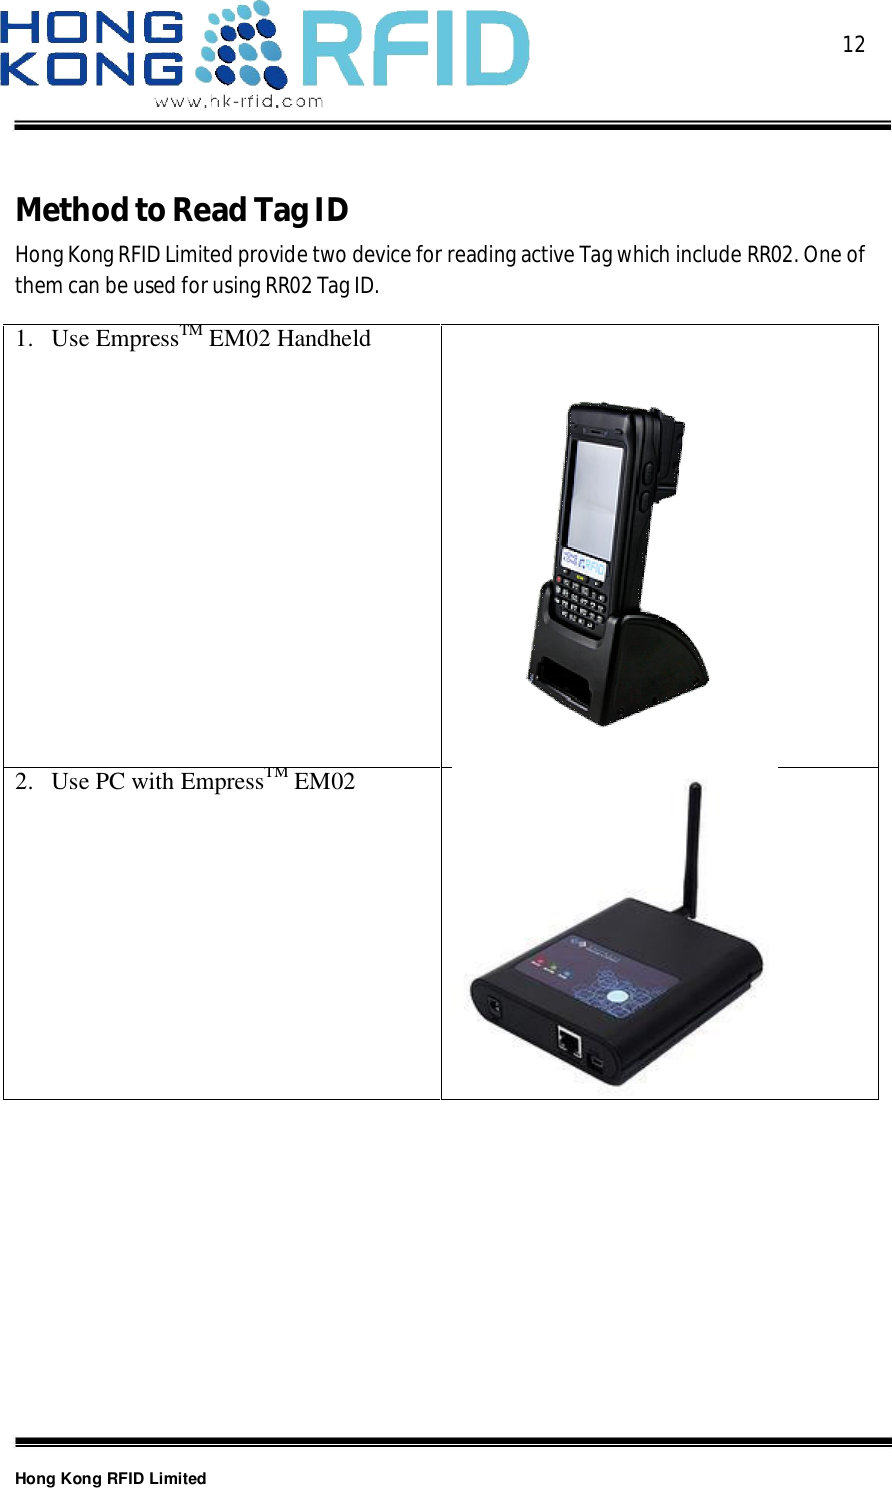  12Hong Kong RFID LimitedMethodtoReadTagIDHong Kong RFID Limited provide two device for reading active Tag which include RR02. One ofthem can be used for using RR02 Tag ID.1.Use EmpressTMEM02 Handheld2.Use PC with EmpressTMEM02